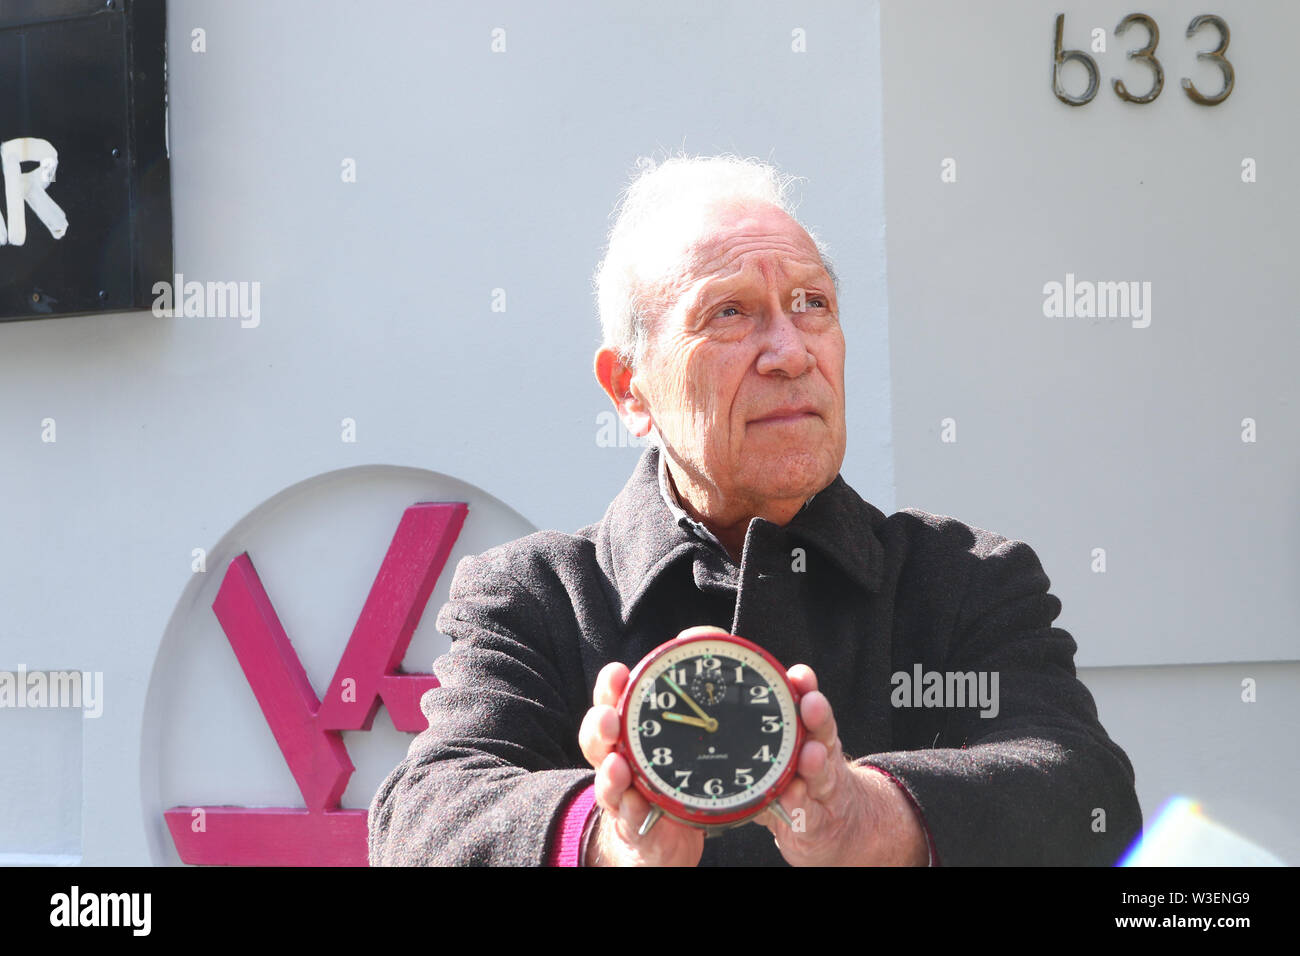 BUENOS AIRES, 14.07.2019: Jorge Beremblum, survivor of the car bomb attack on the AMIA headquarters on July 18, 1994 in front of the new building and Stock Photo